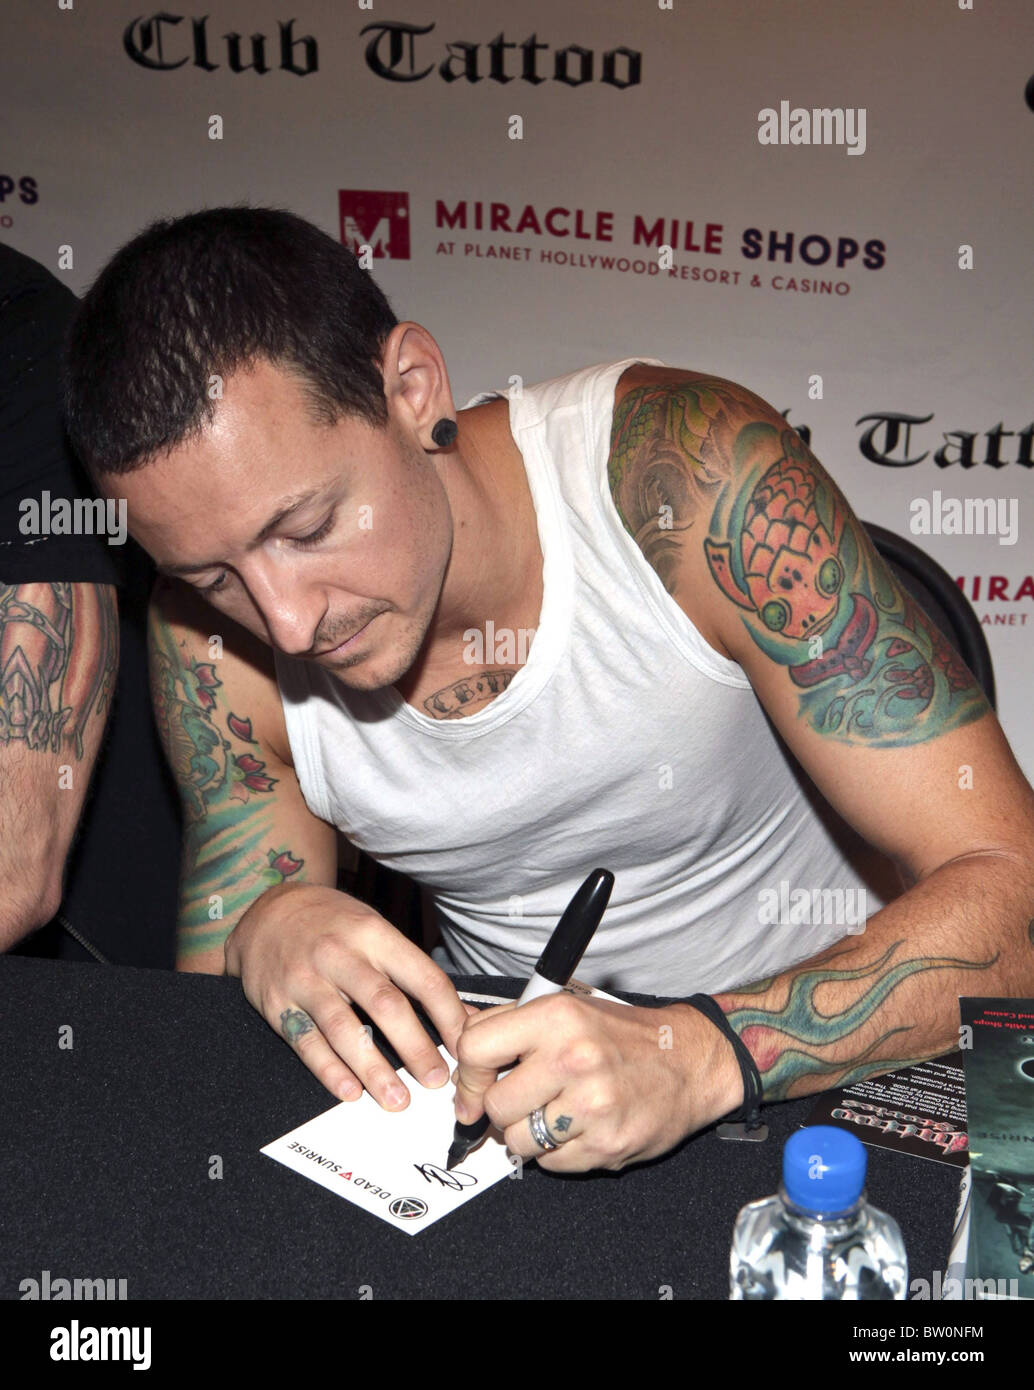 Linkin Park singer Chester Bennington signs autographs during the News  Photo  Getty Images